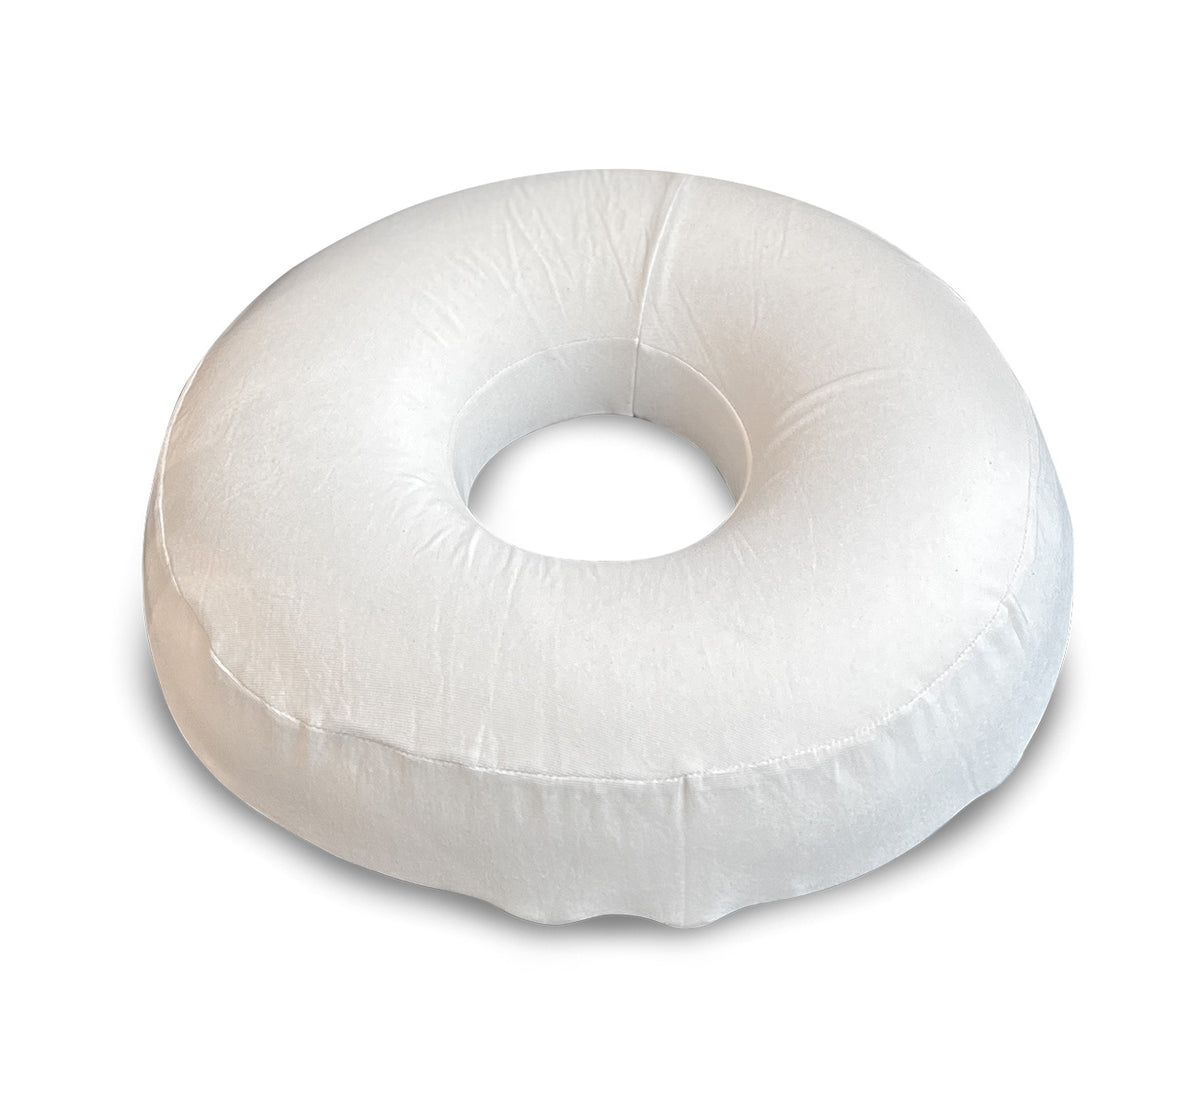 Lime CNH Donut Pillow  Donut pillow, Donut shape, Hook and loop